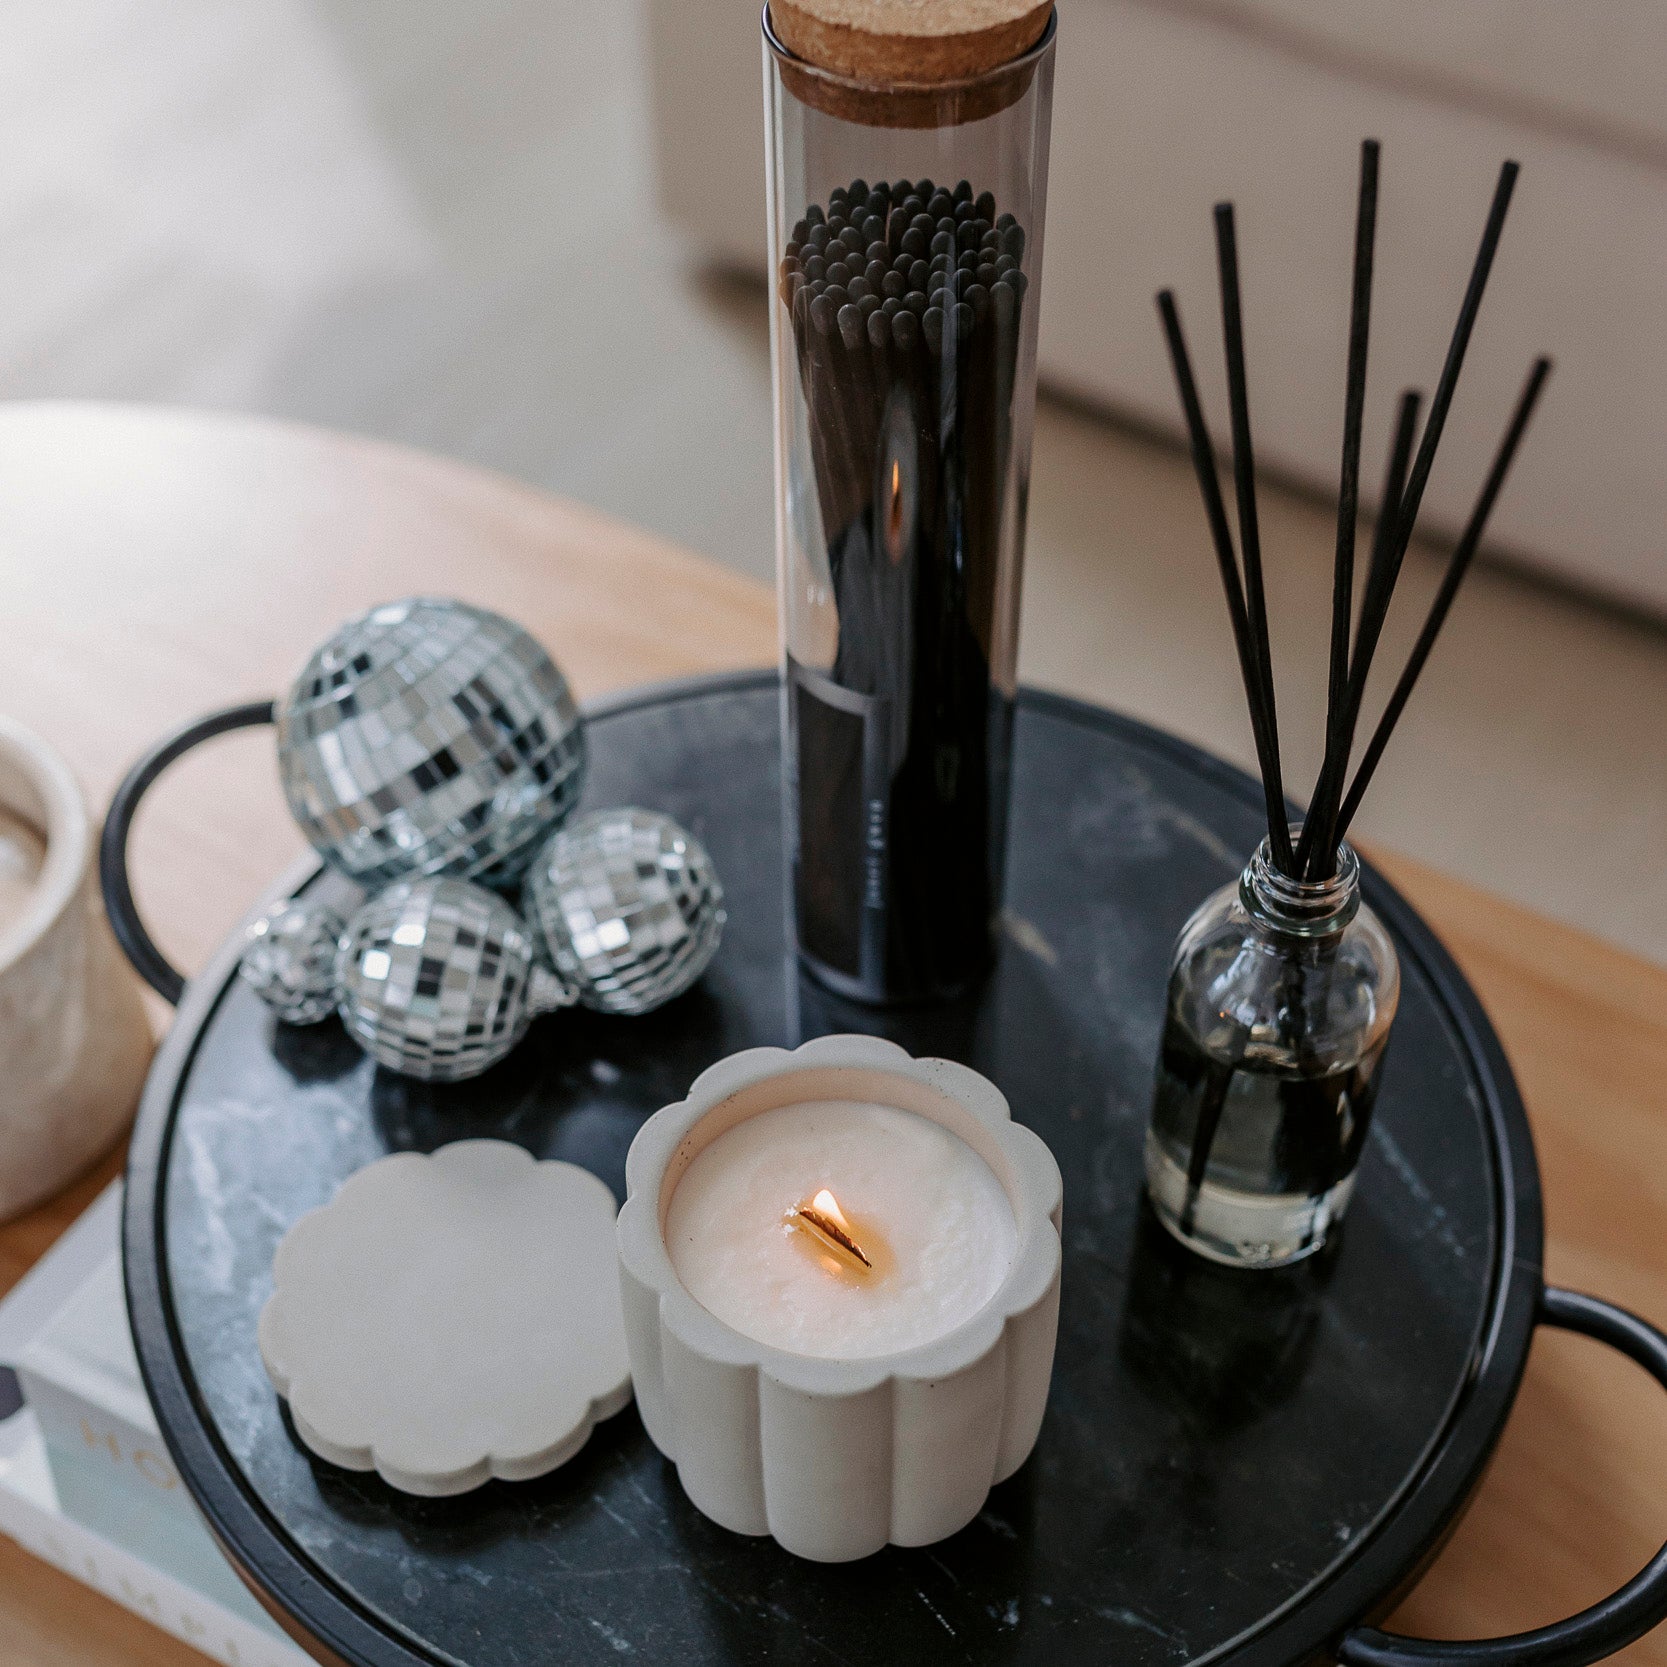 Calm w/in the Chaoss - Flower Concrete Vessel Soy Candle